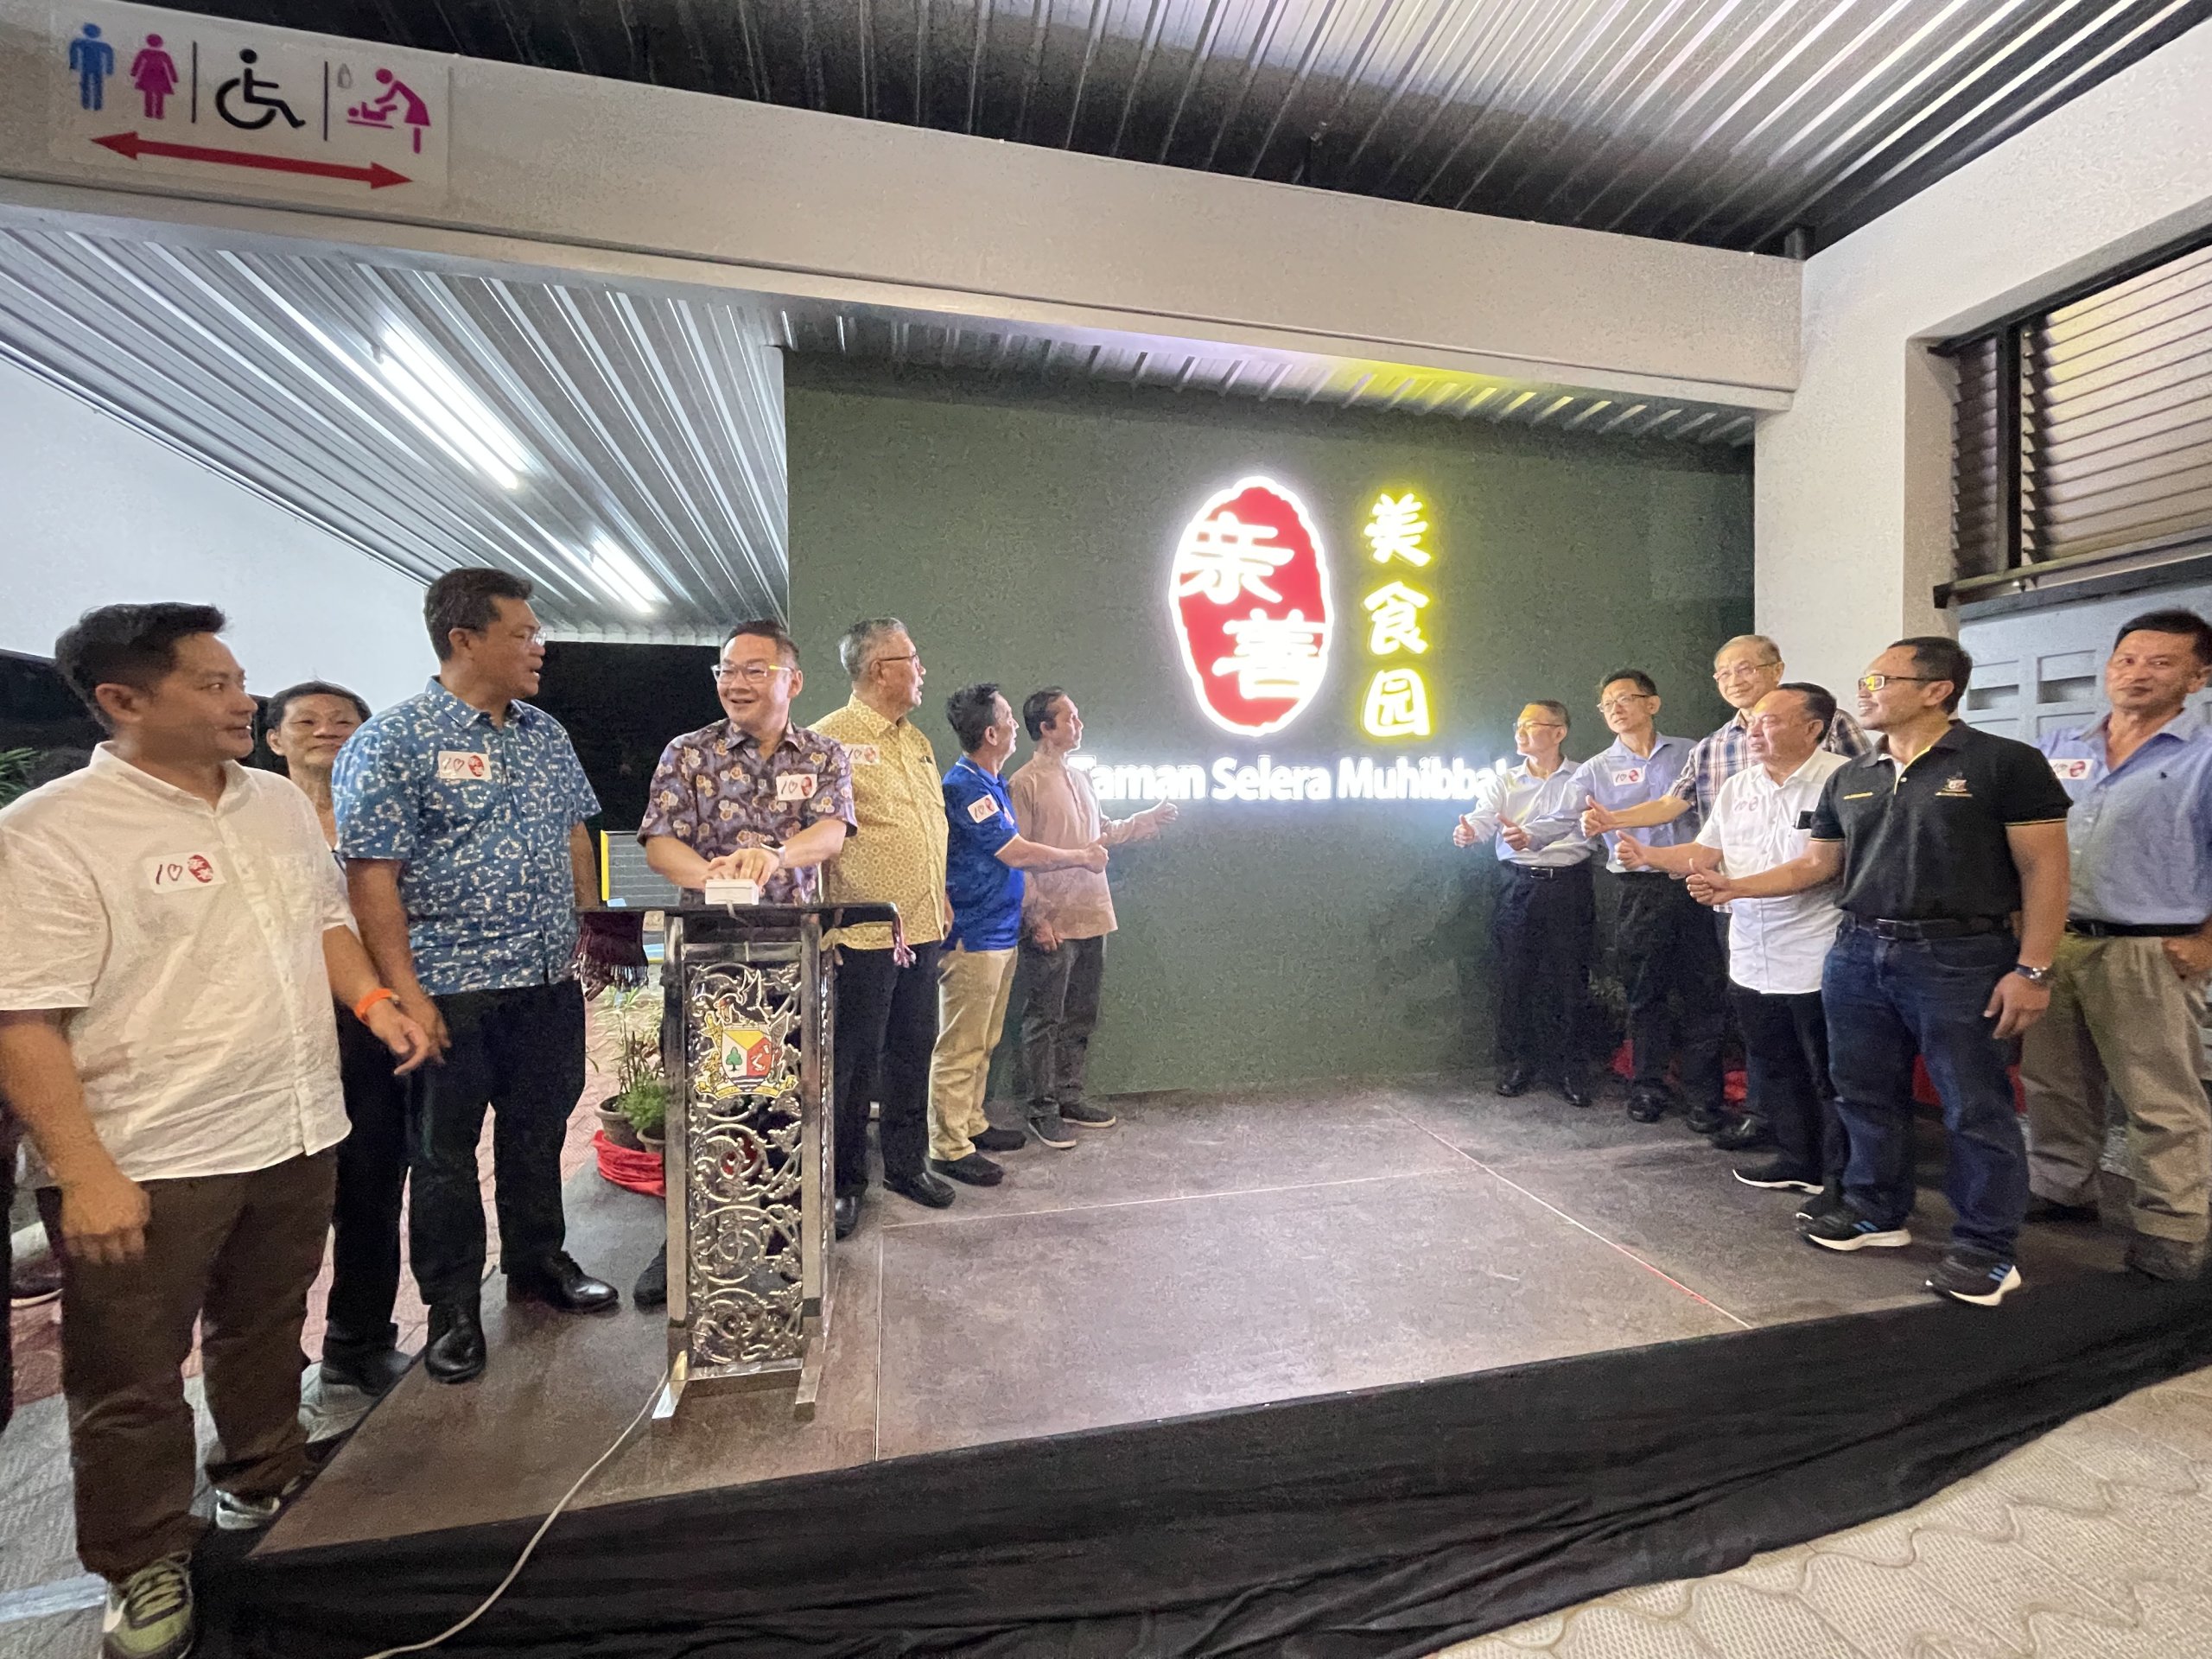 Tiang (third left) switches on the lights of the Taman Selera Muhibbah signboard to officially open the food court while (from fourth left) Ting, Yong and Bujang look on.